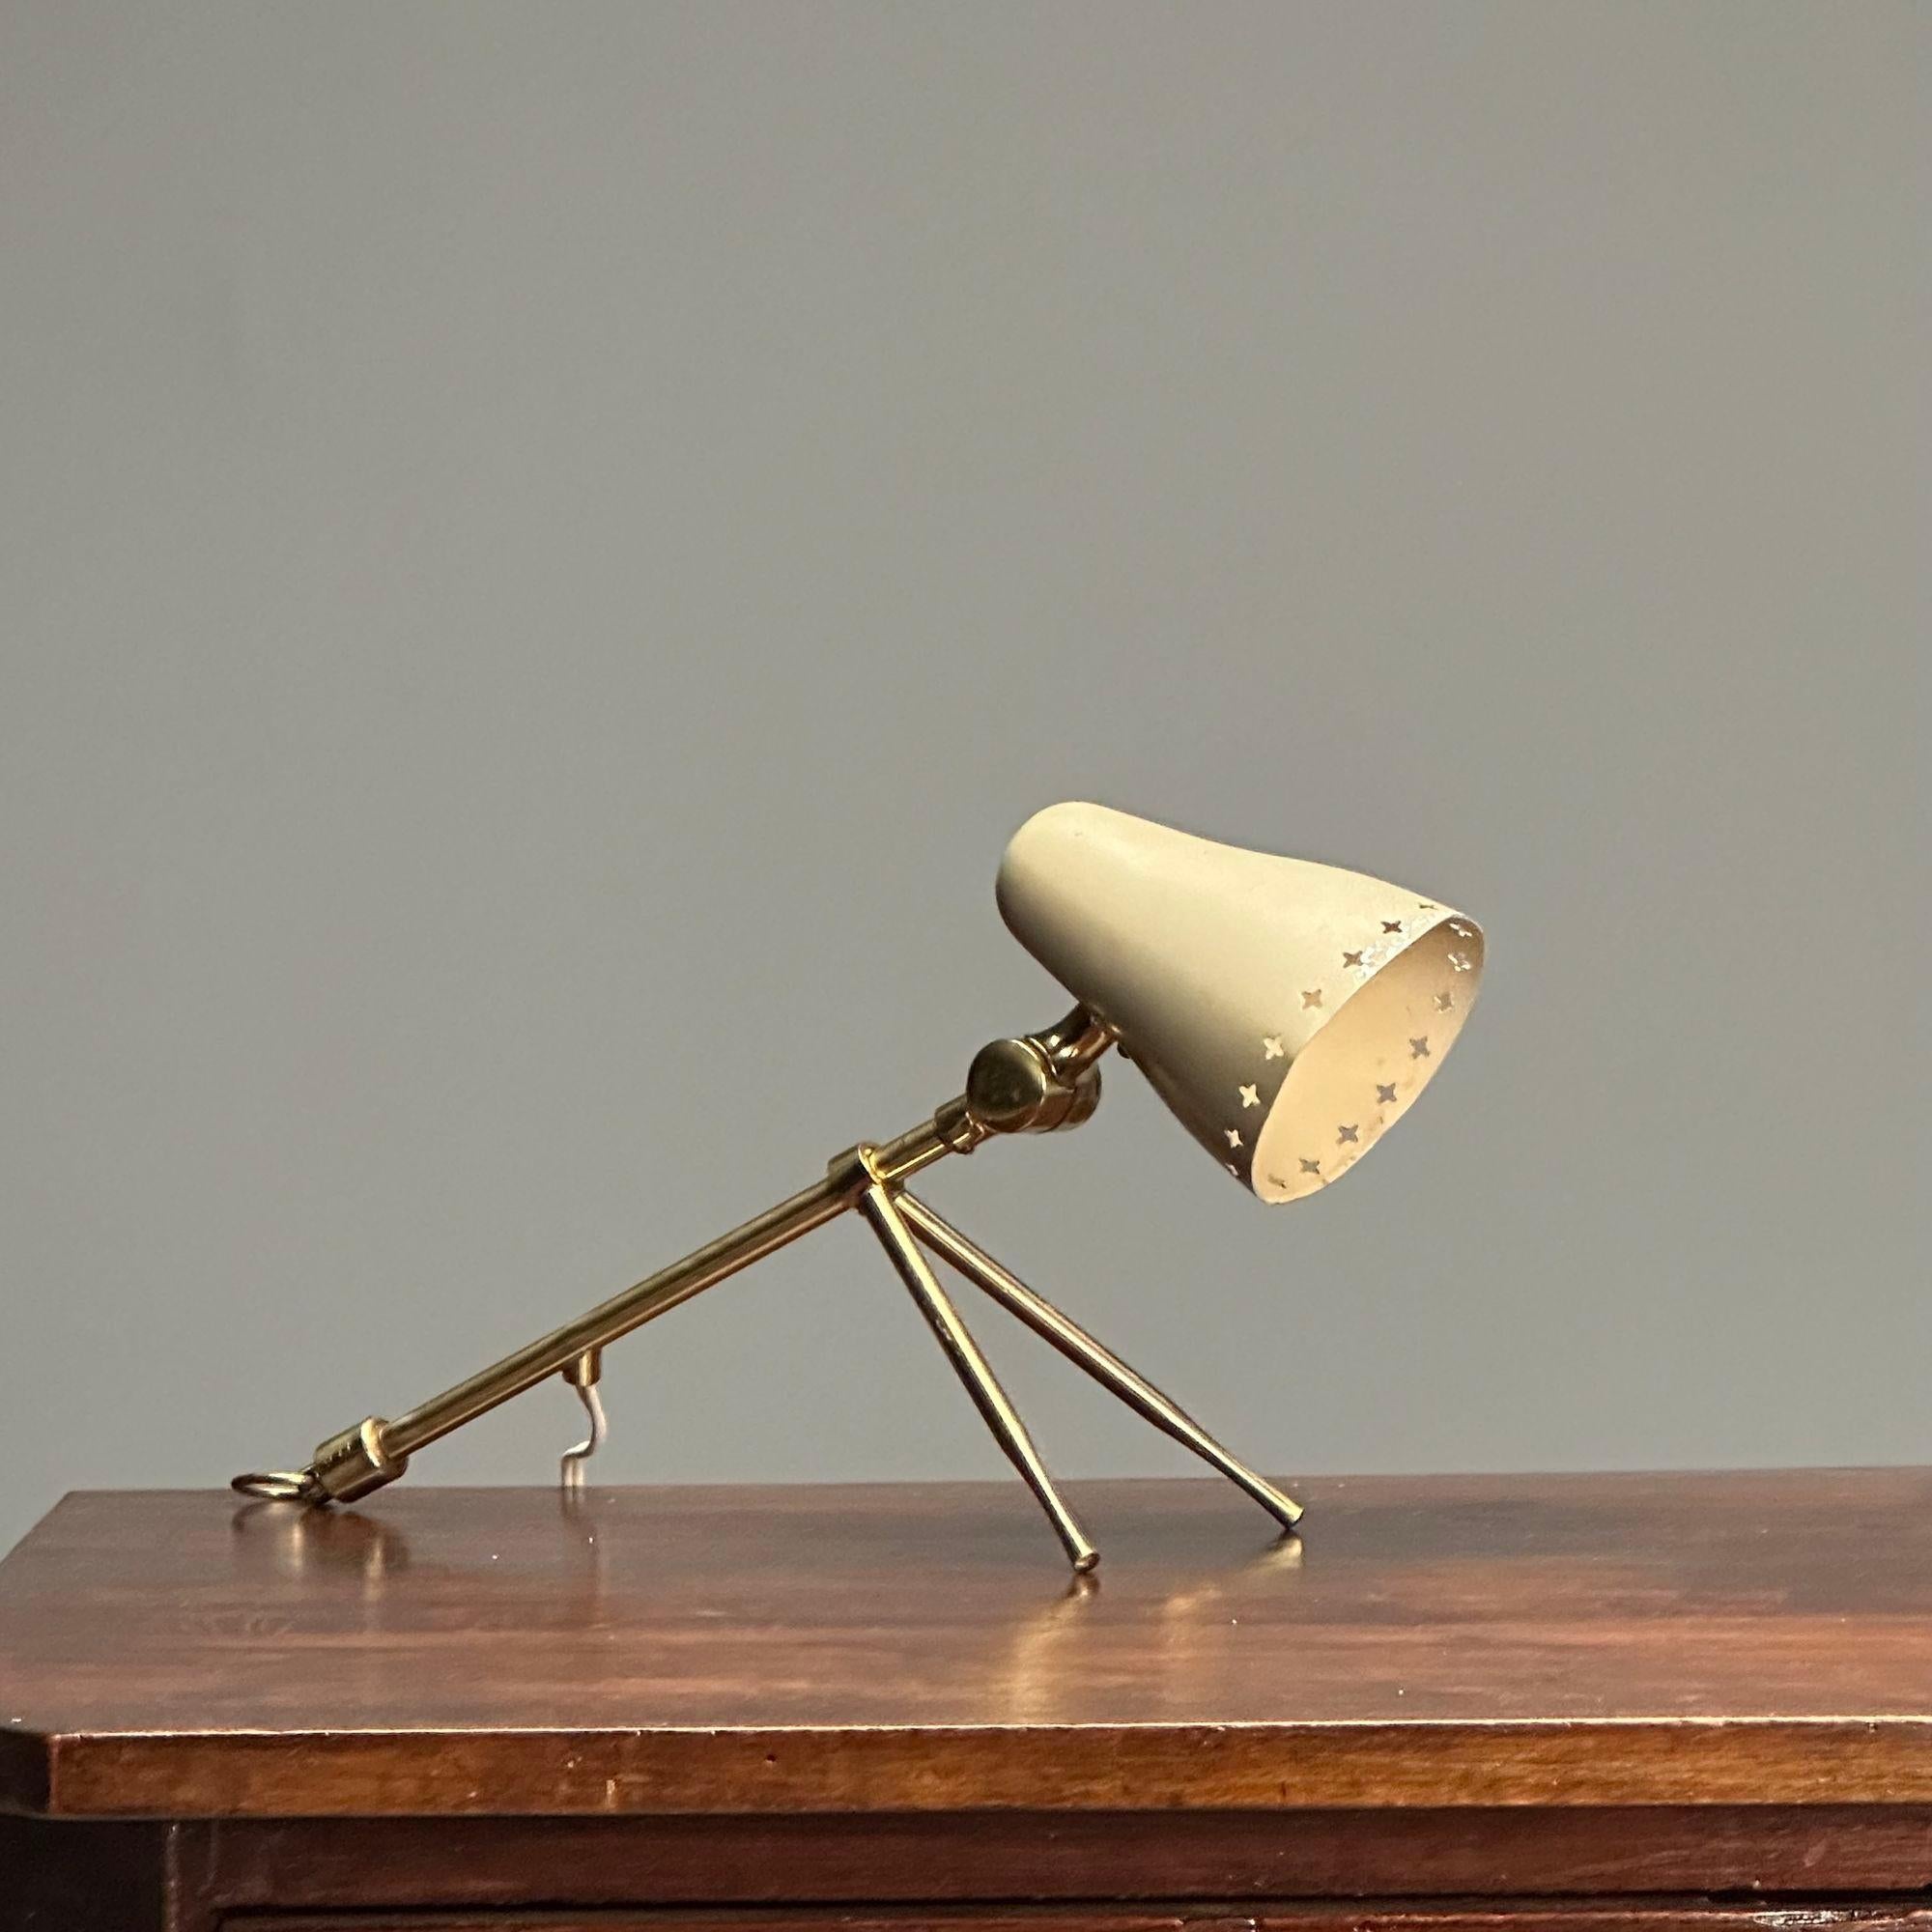 Boris Lacroix, Falkenbergs, Swedish Mid-Century Modern, Table Lamp, Brass, 1960s

Modern table or wall lamp designed by Jean Boris Lacroix and produced in Sweden Falkenbergs Belysning circa 1960s. Wonderful patina on the painted metal shade with